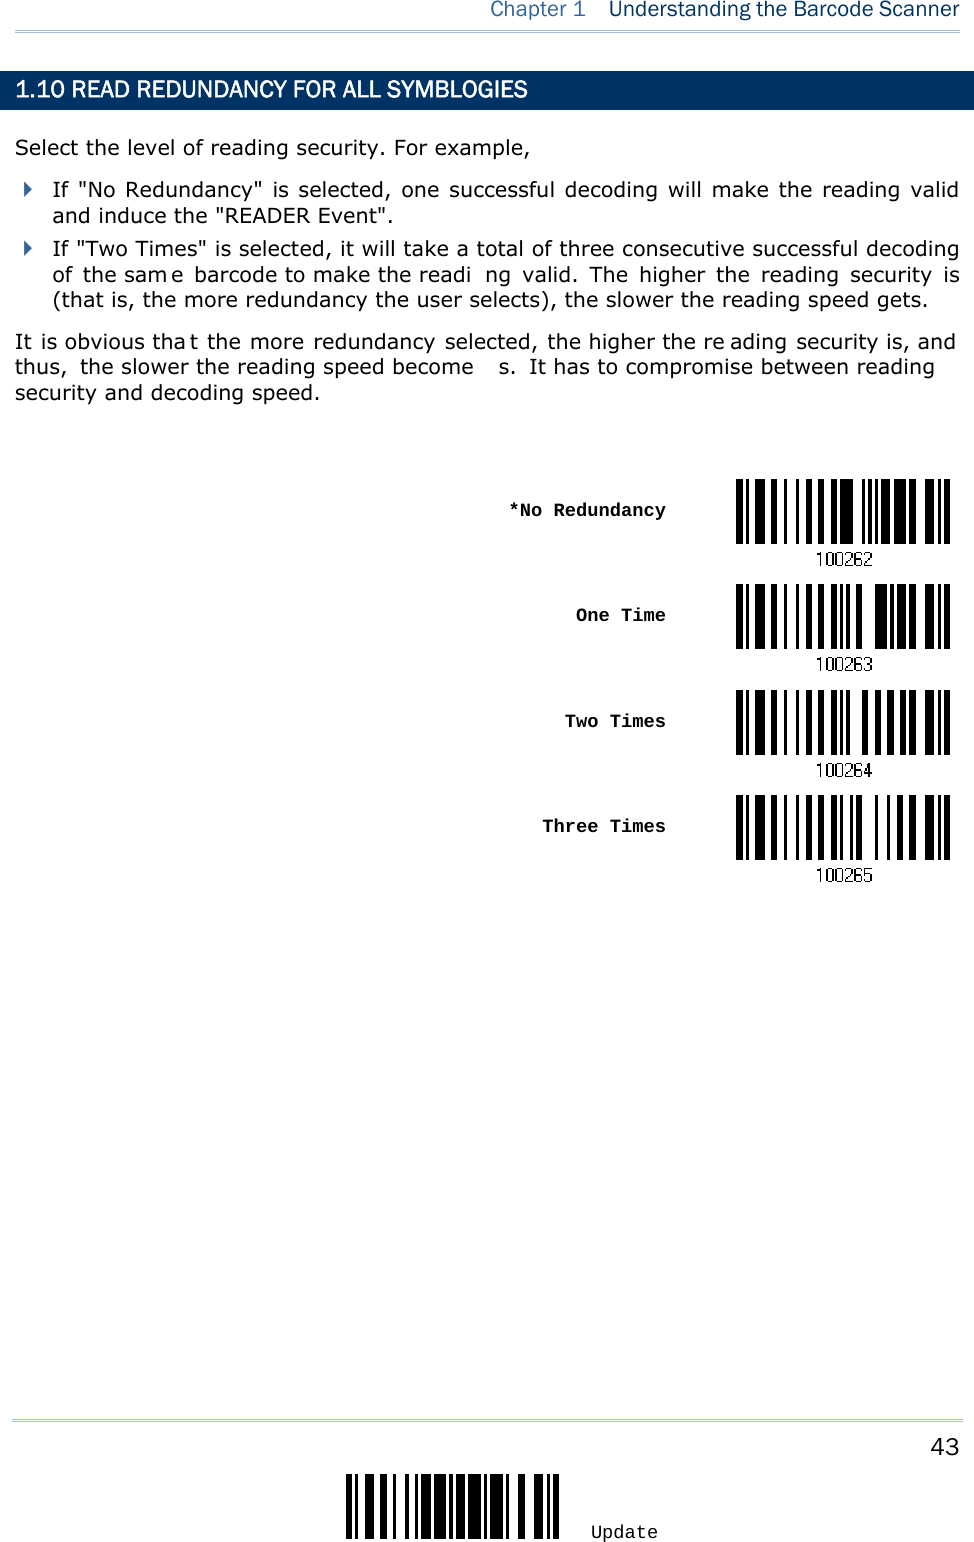     43 Update  Chapter 1  Understanding the Barcode Scanner  1.10 READ REDUNDANCY FOR ALL SYMBLOGIES Select the level of reading security. For example,  If &quot;No Redundancy&quot; is selected, one successful decoding will make the reading valid and induce the &quot;READER Event&quot;.  If &quot;Two Times&quot; is selected, it will take a total of three consecutive successful decoding of the sam e barcode to make the readi ng valid. The higher the reading security is (that is, the more redundancy the user selects), the slower the reading speed gets.   It is obvious tha t the more redundancy selected, the higher the re ading security is, and thus, the slower the reading speed become s. It has to compromise between reading security and decoding speed.   *No Redundancy One Time Two Times Three Times                       